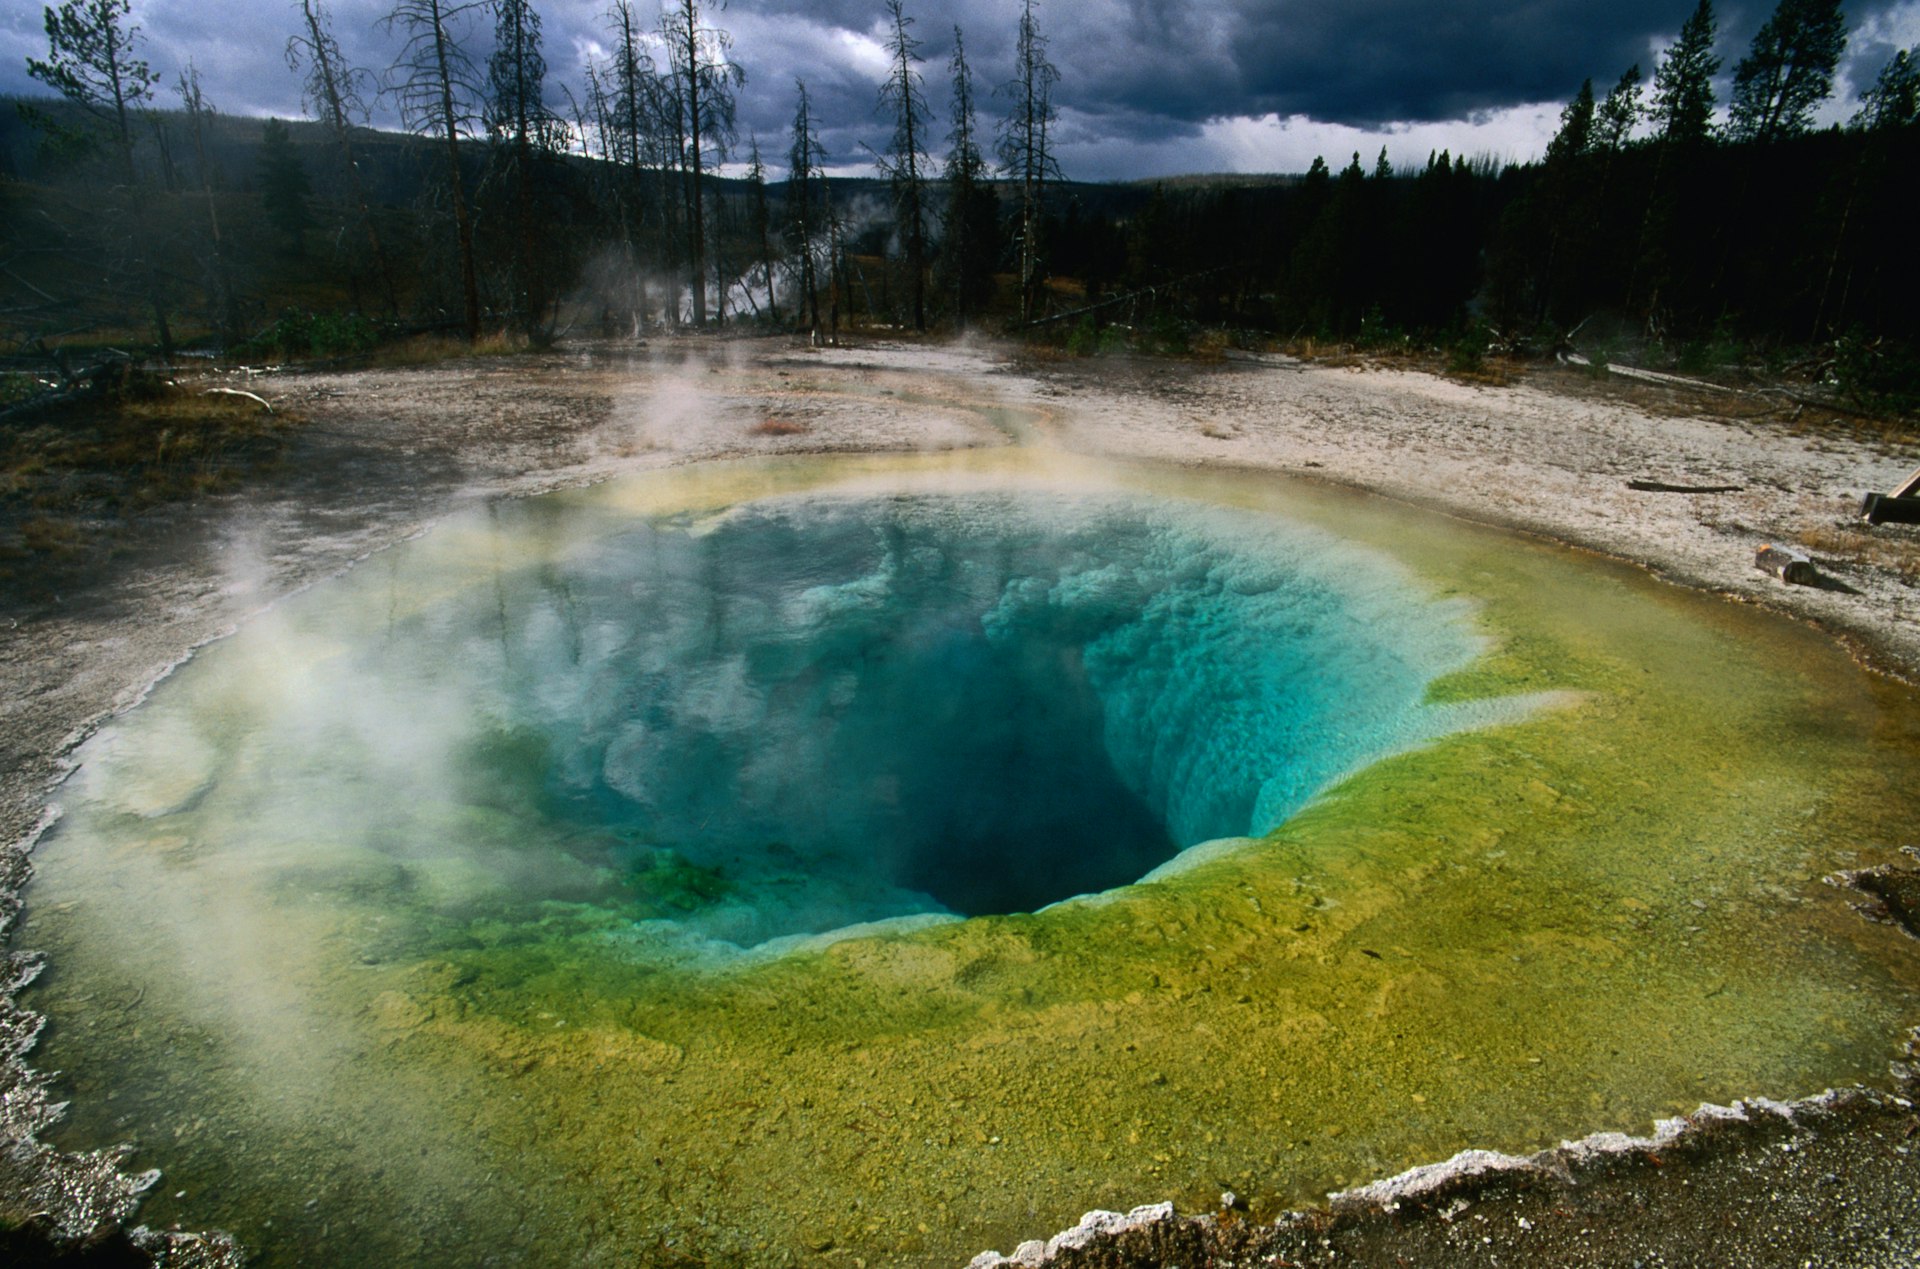 An overview of the Morning Glory pool in Yellowstone National Park